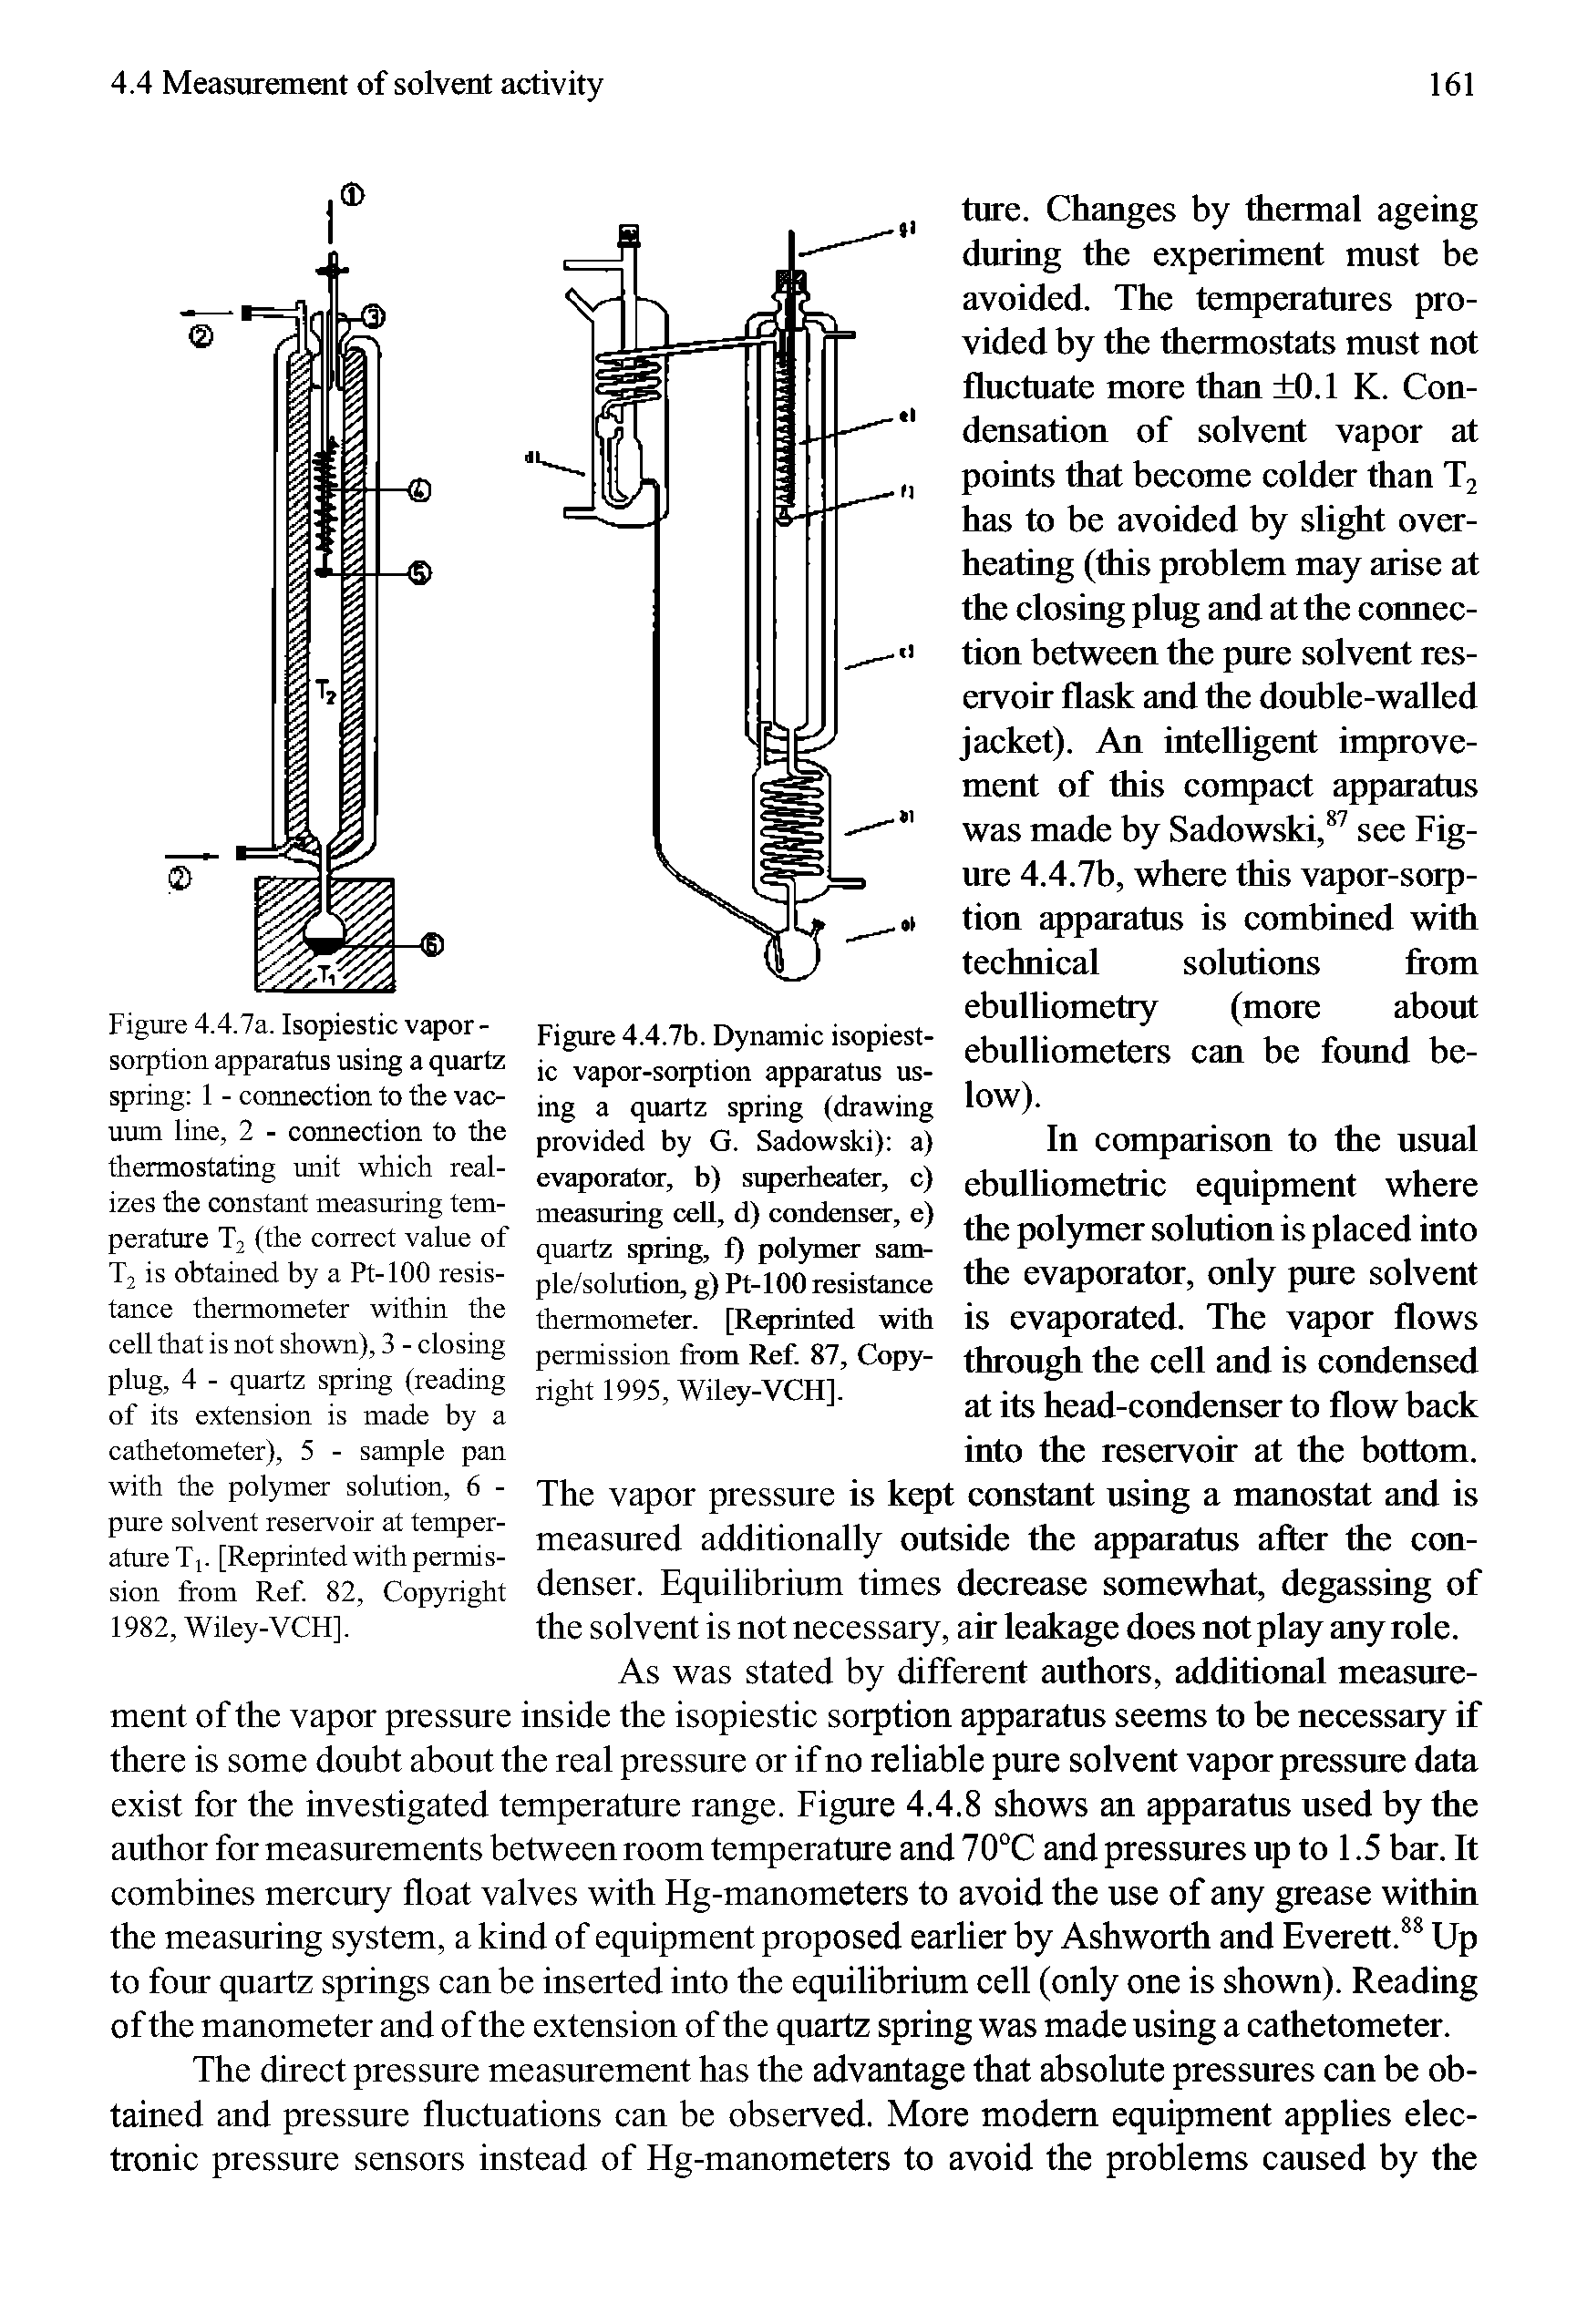 Figure 4.4.7a. Isopiestic vapor-sorption apparatus using a quartz spring 1 - connection to the vacuum line, 2 - connection to the thermostating unit which realizes the constant measuring temperature T2 (the correct value of T2 is obtained by a Pt-100 resistance thermometer within the cell that is not shown), 3 - closing plug, 4 - quartz spring (reading of its extension is made by a cathetometer), 5 - sample pan with the polymer solution, 6 -pure solvent reservoir at temperature T[. [Reprinted with permission from Ref 82, Copyright 1982, Wiley-VCH].